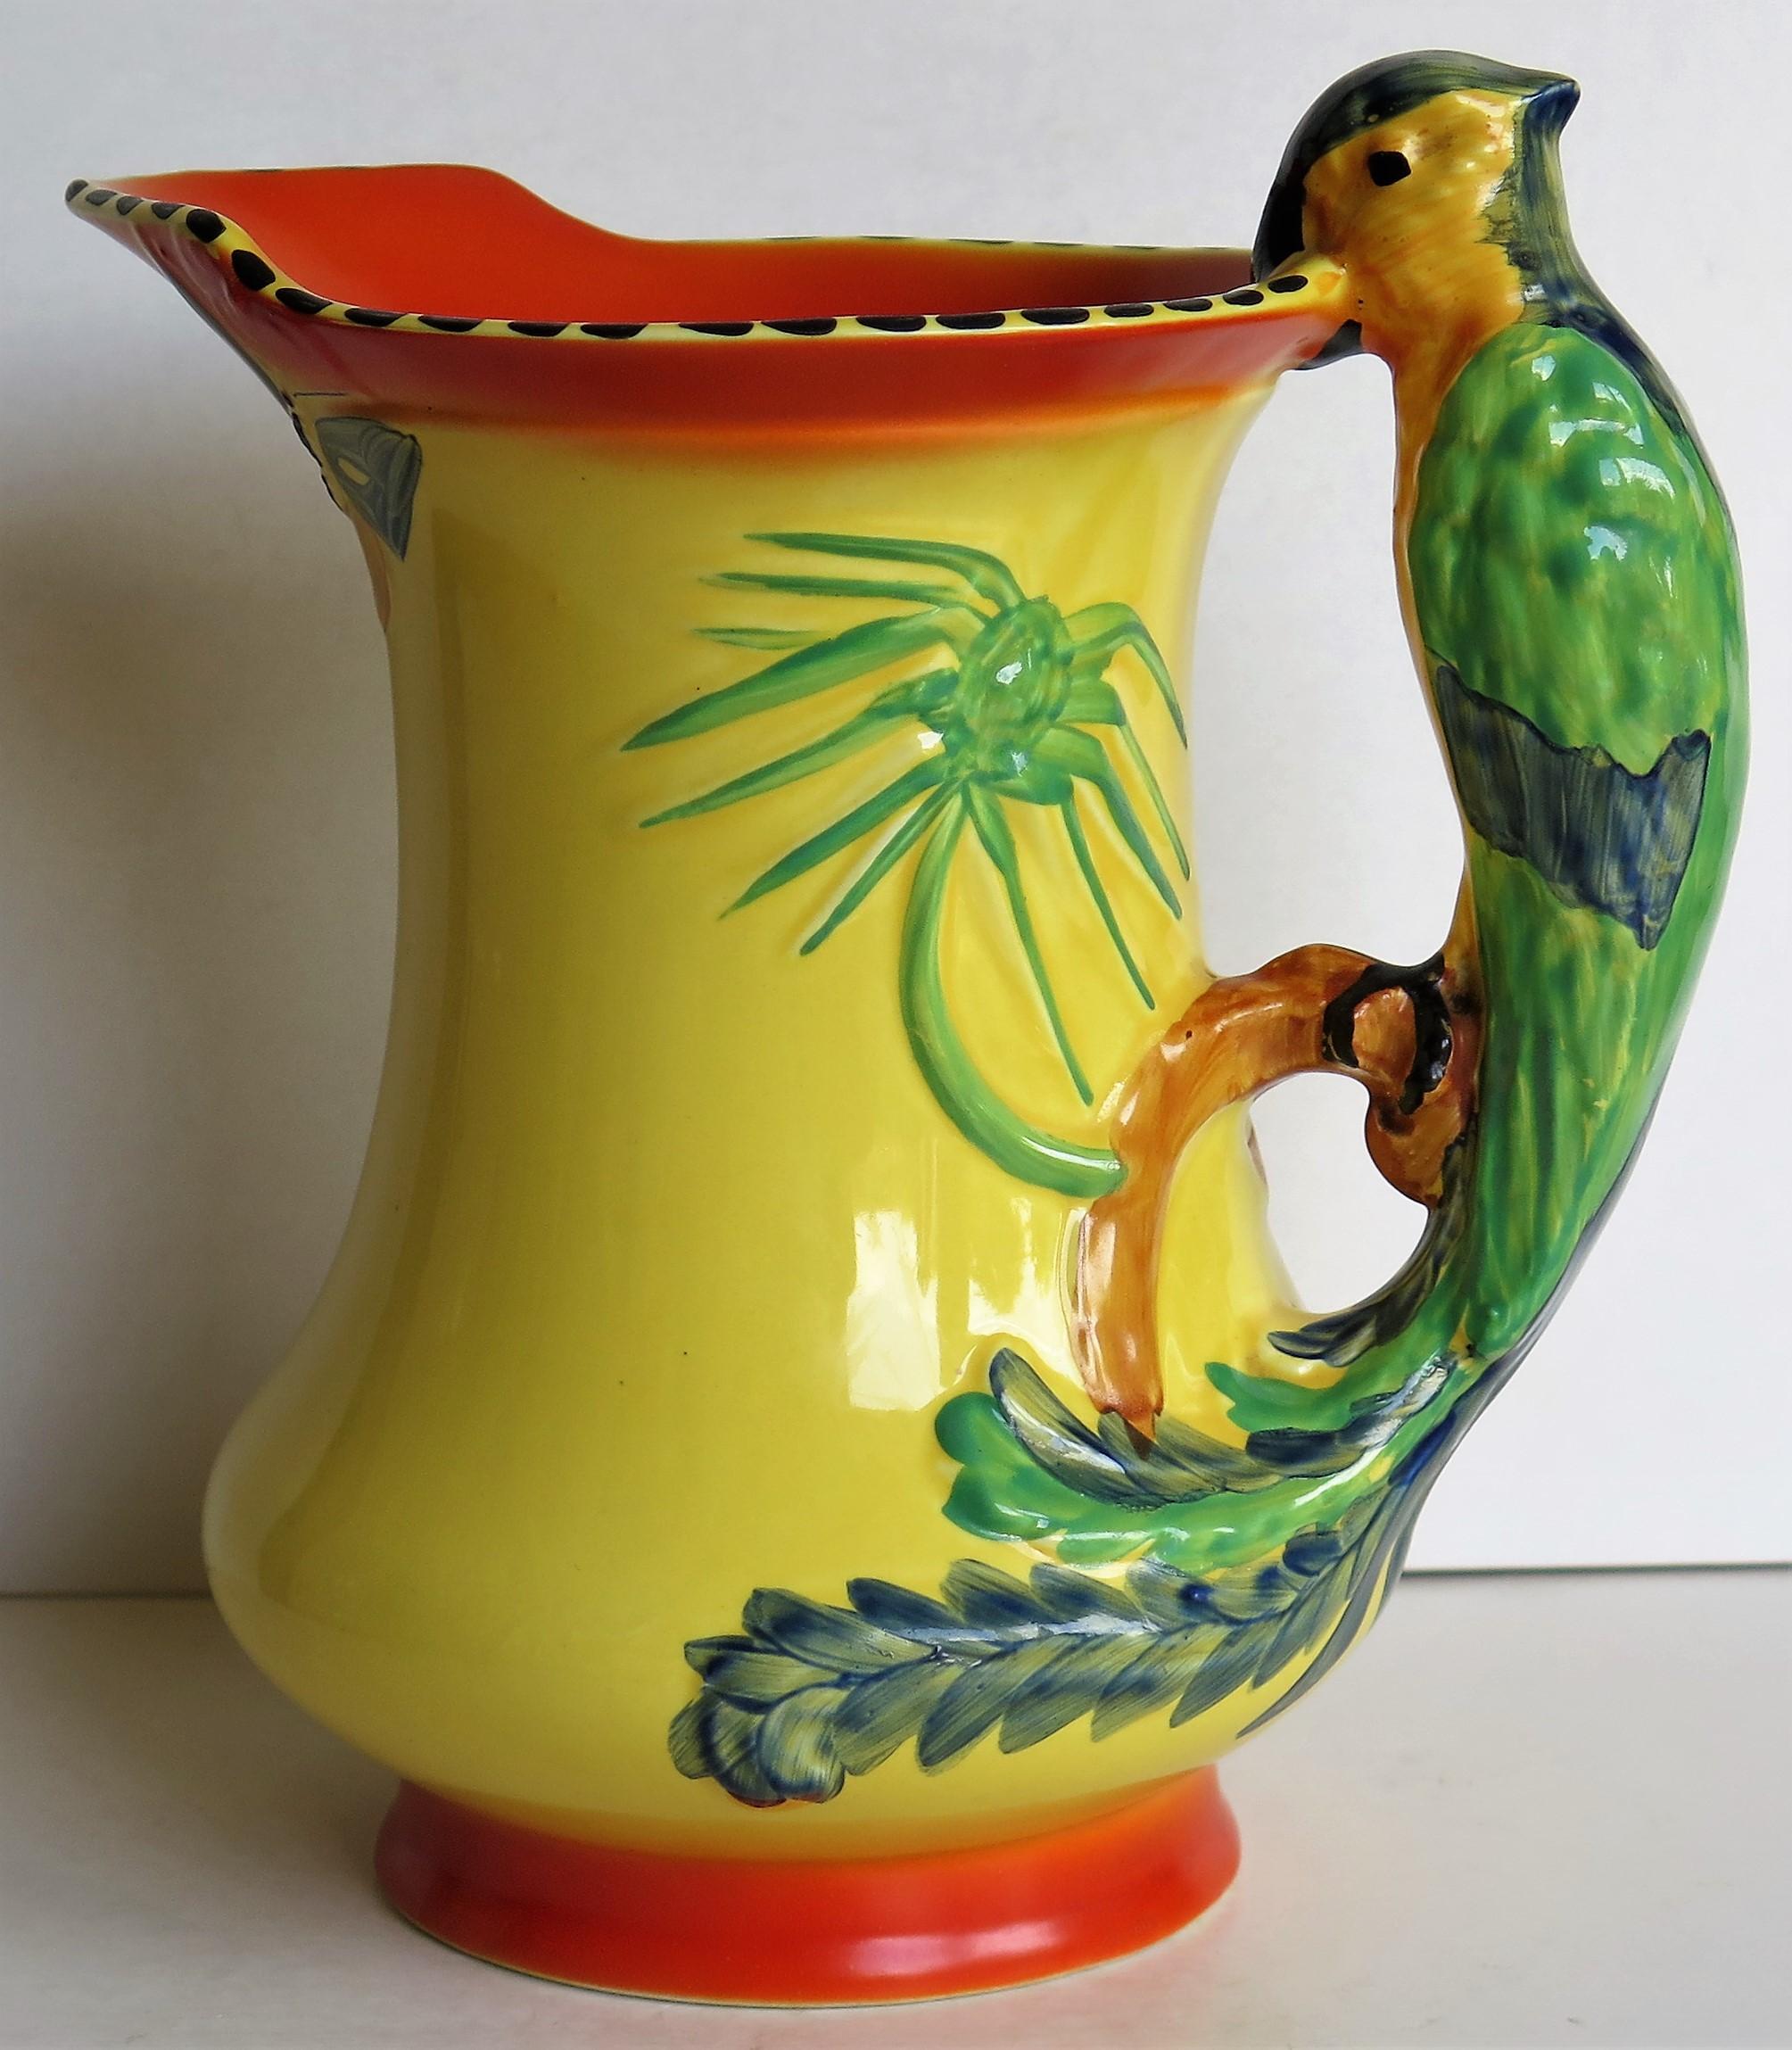 This is a very decorative Burleigh Ware pottery jug or pitcher made by Burgess and Leigh of Burslem, Staffordshire Potteries, England during the Art Deco period, circa 1930.

The jug has an interesting shape with a Parrot handle, moulded leaves